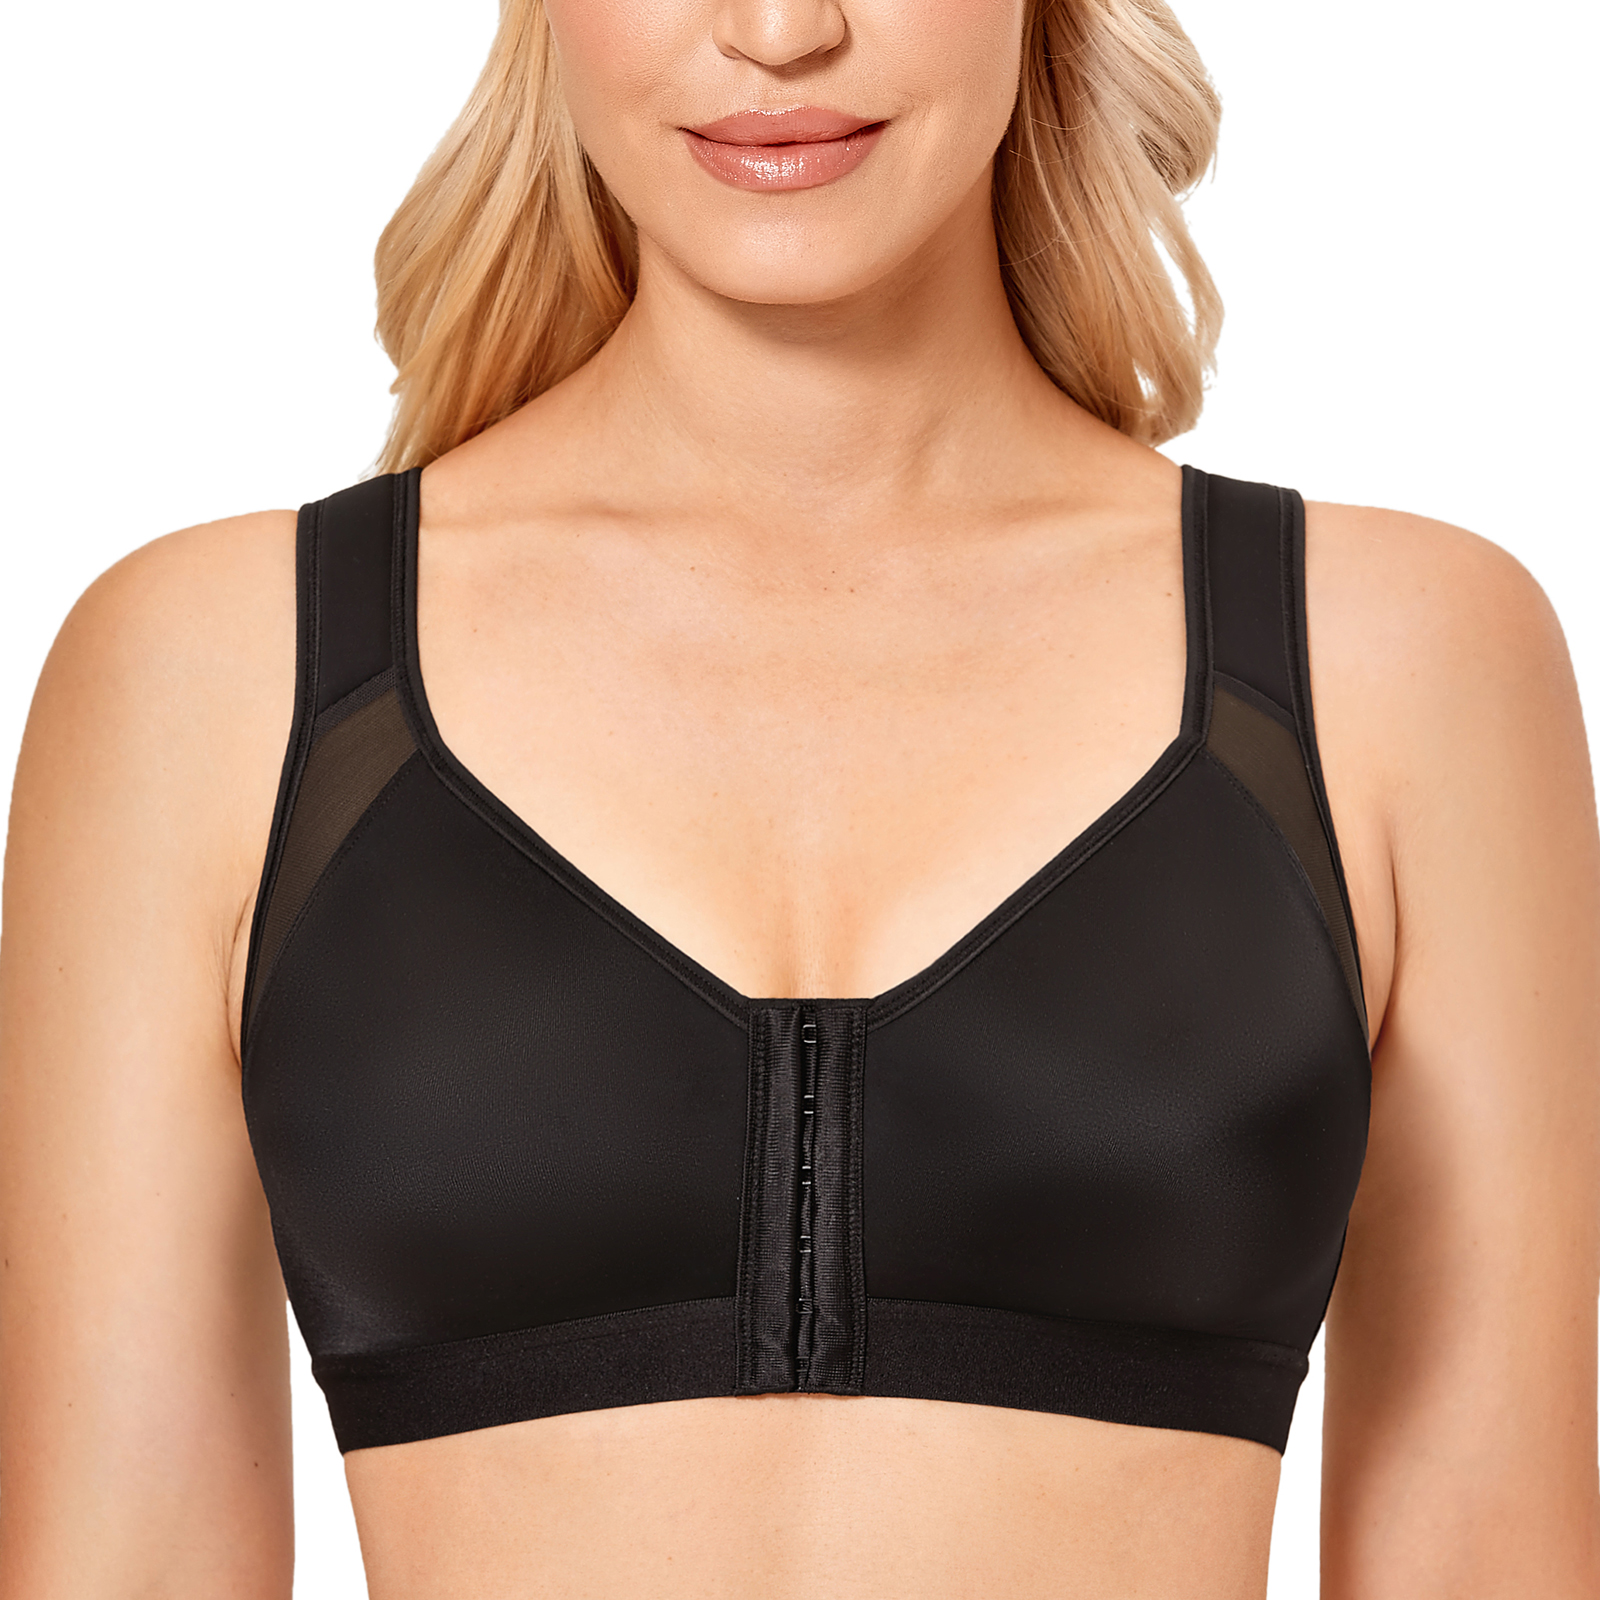 DELIMIRA Women's Front Closure Posture Wireless Back Support